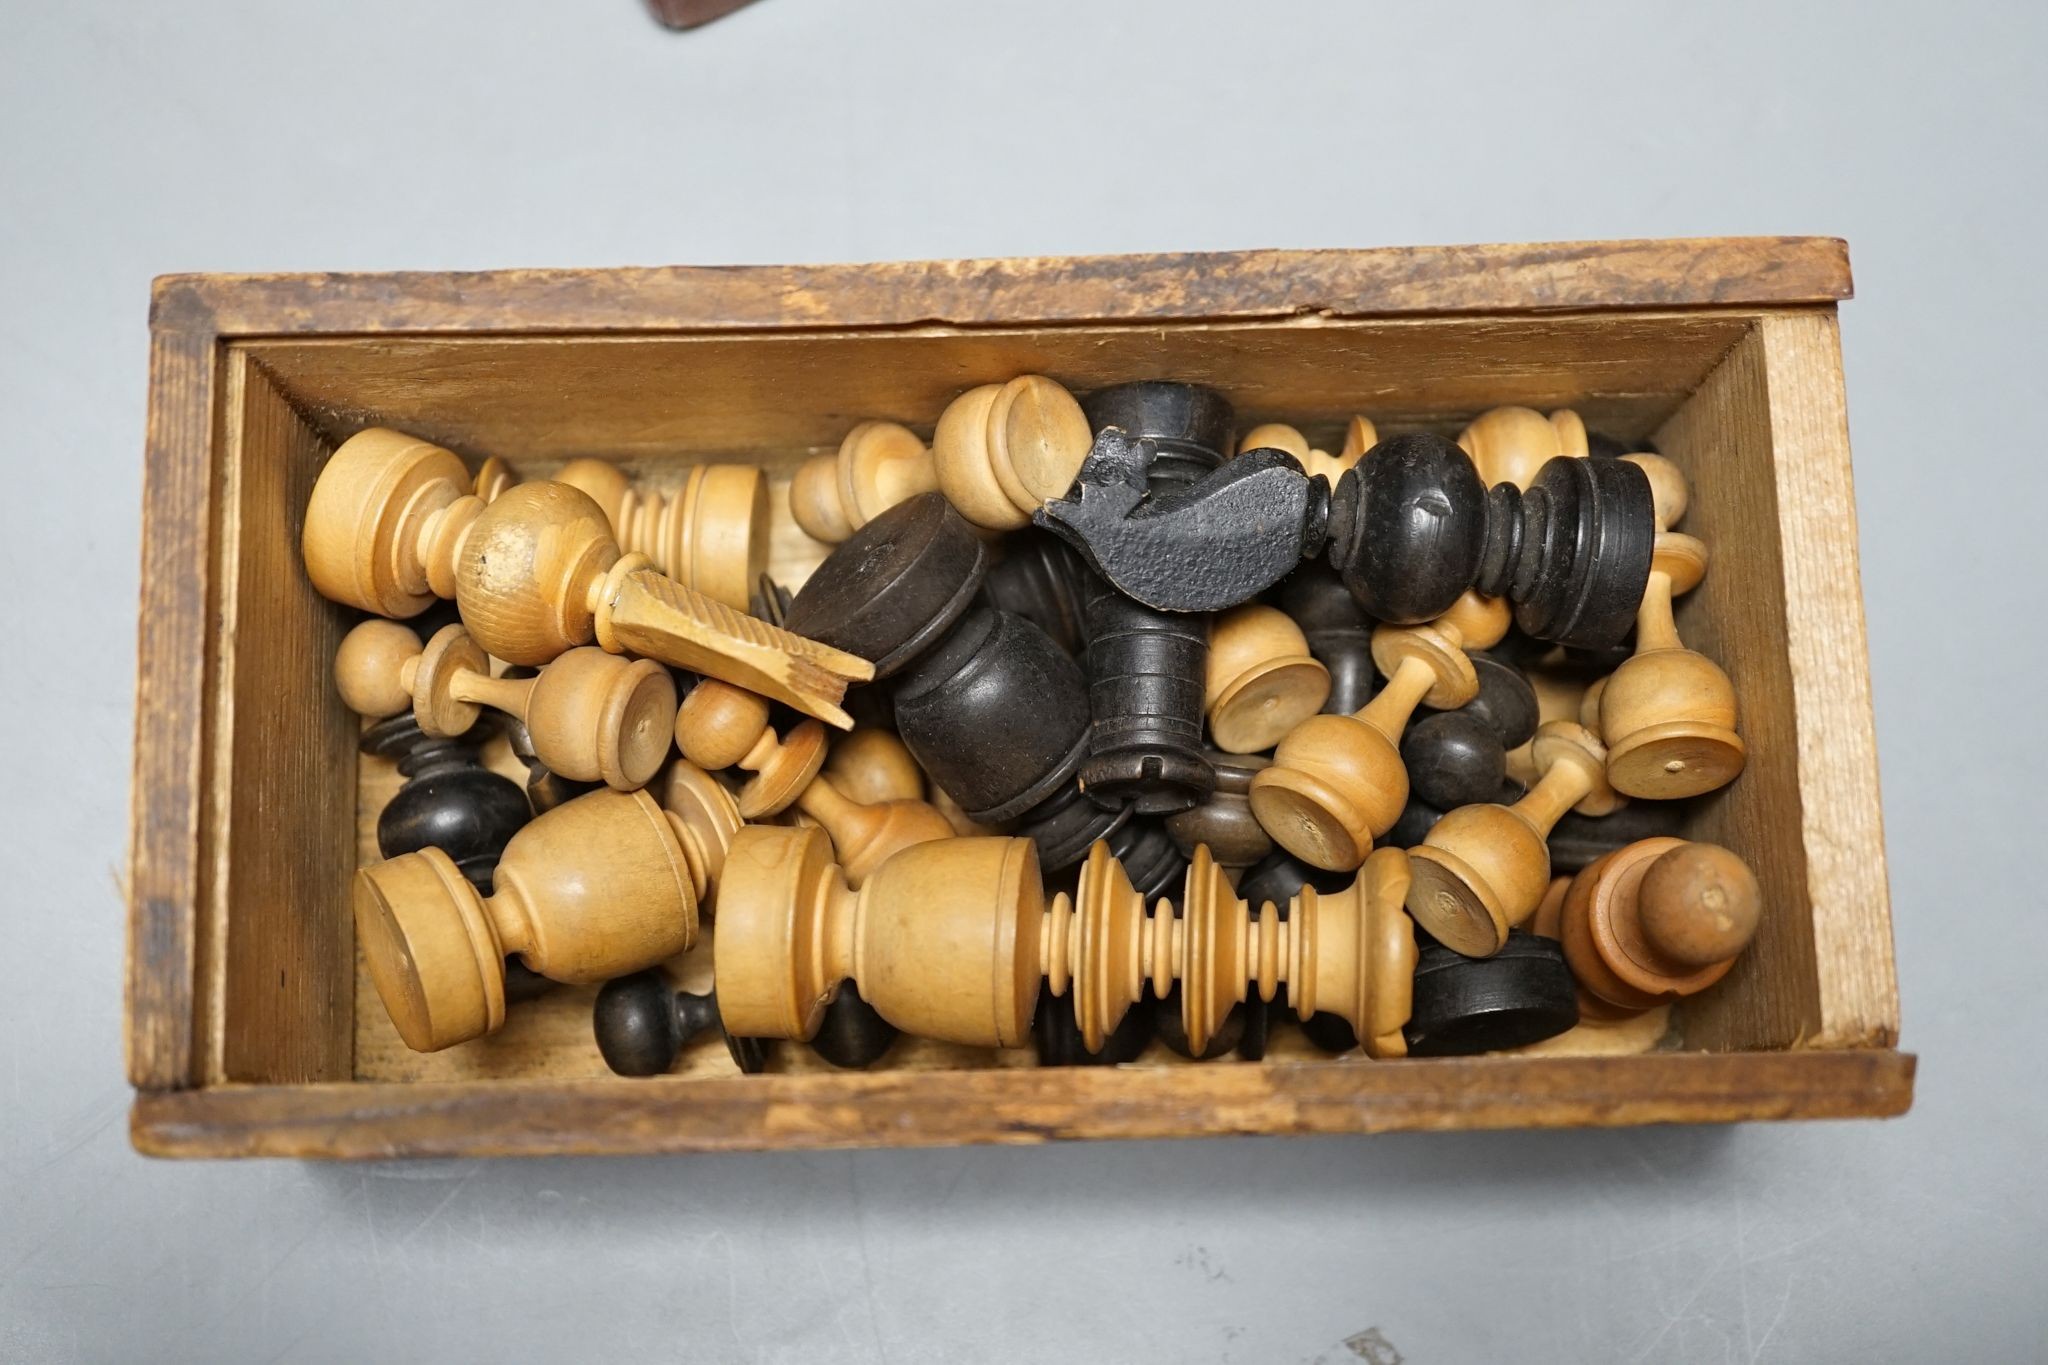 Two boxed chess sets, one turned wood, the other bone